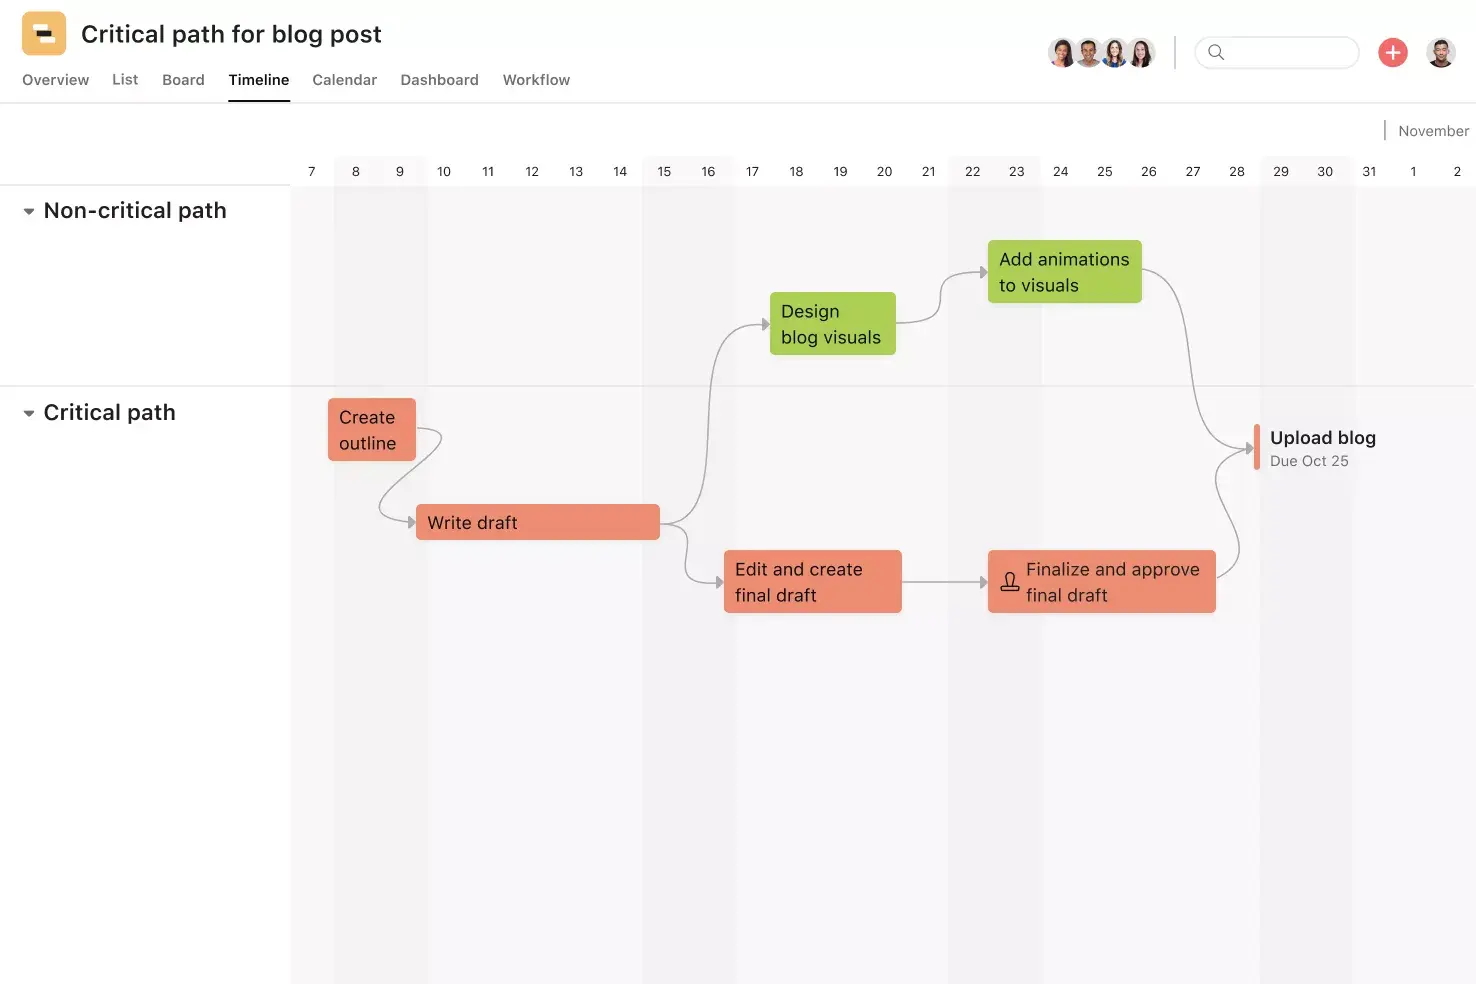 [Product ui] Critical path project in Asana, Gantt-style project view (Timeline)